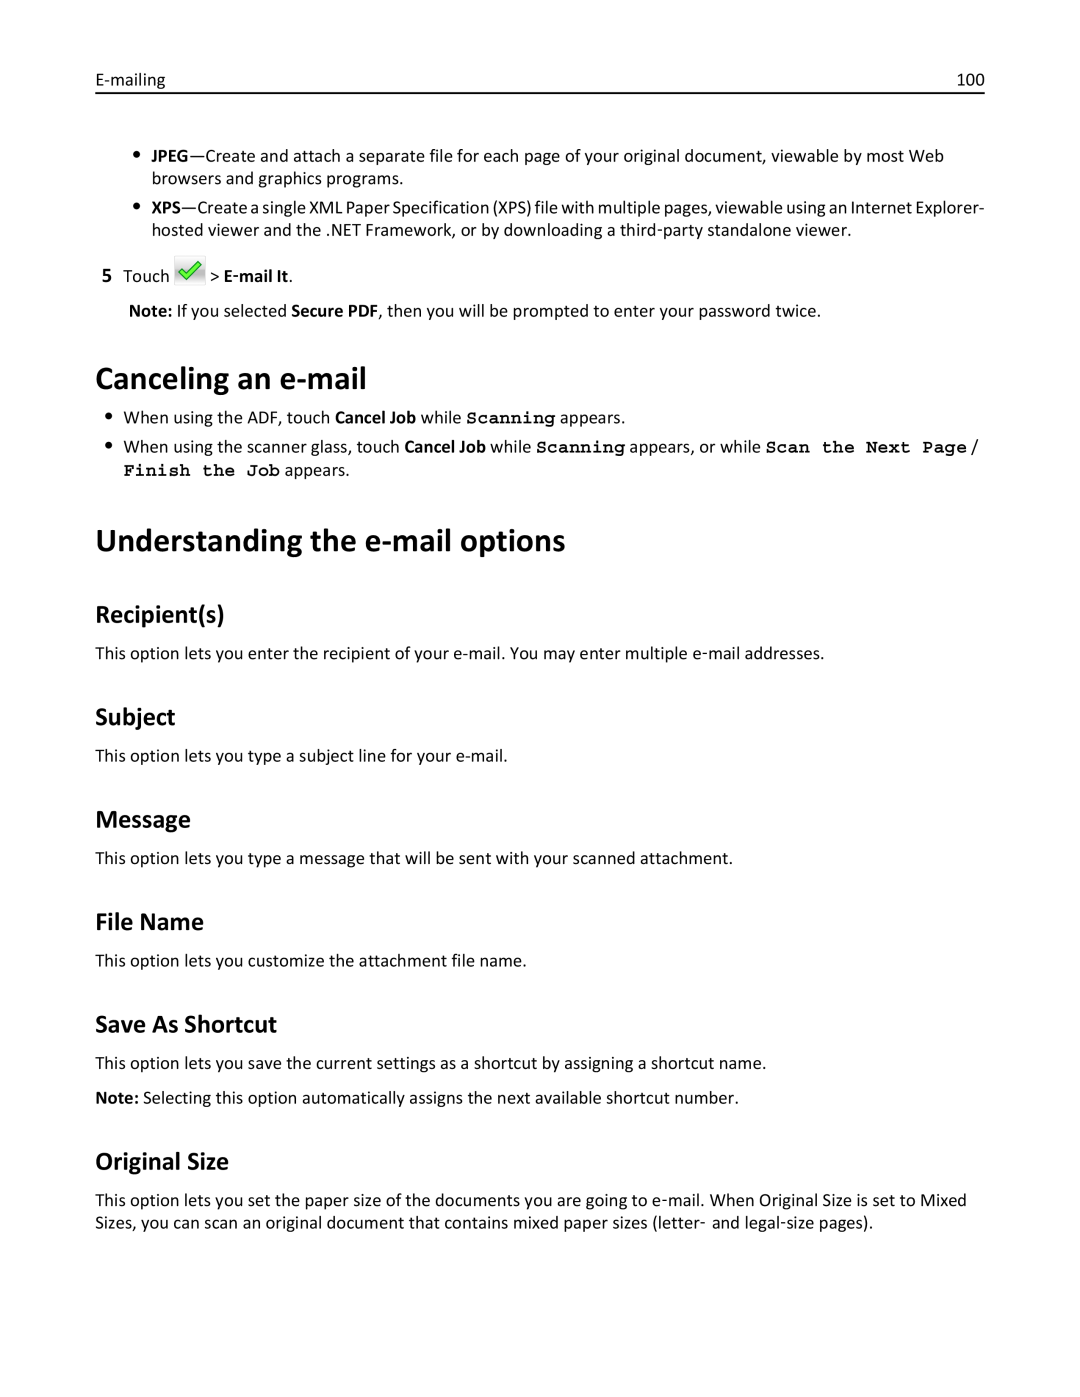 Lexmark 670 Canceling an e-mail, Understanding the e-mail options, Recipients, Subject, Message, File Name, Original Size 